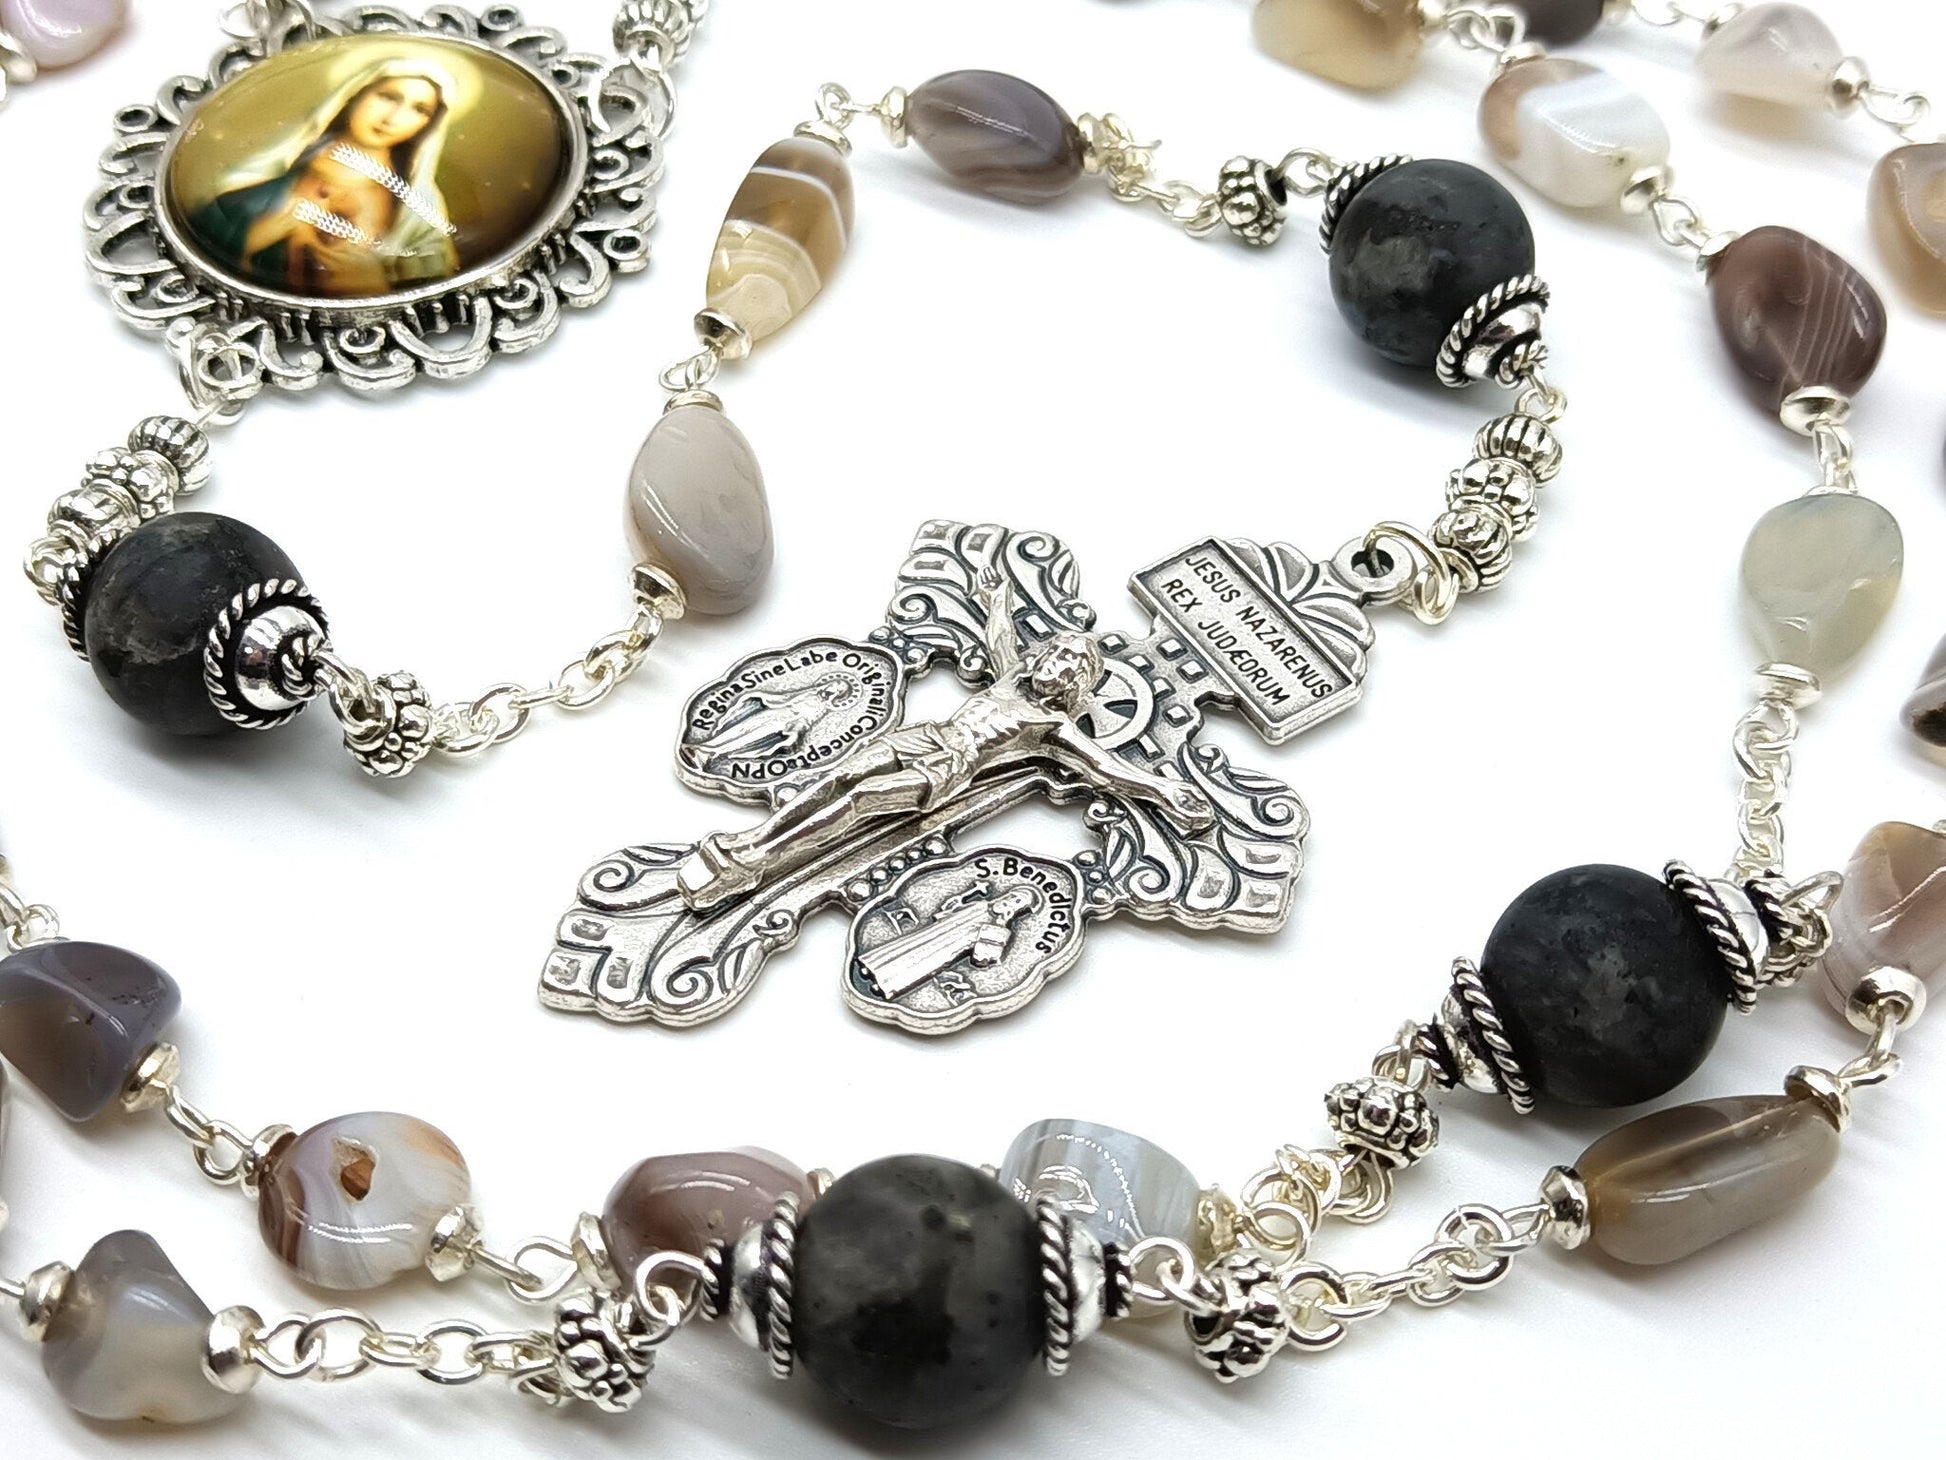 Agate gemstone unique rosary beads with silver pardon crucifix and Immaculate heart picture centre medal.